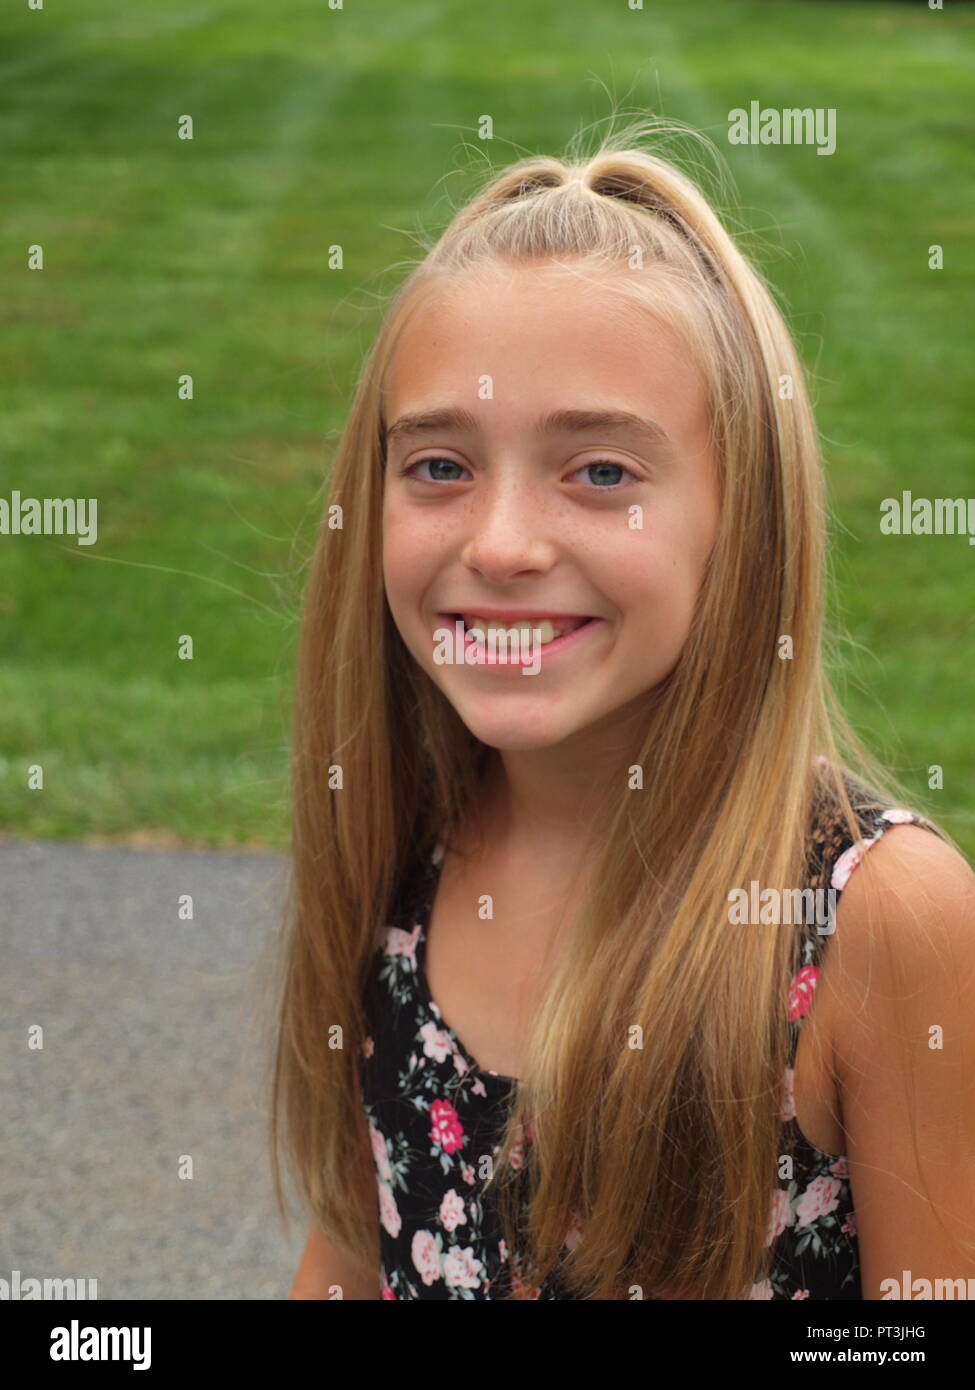 Cute smiling 10 year old girl with long hair and print dress. Stock Photo